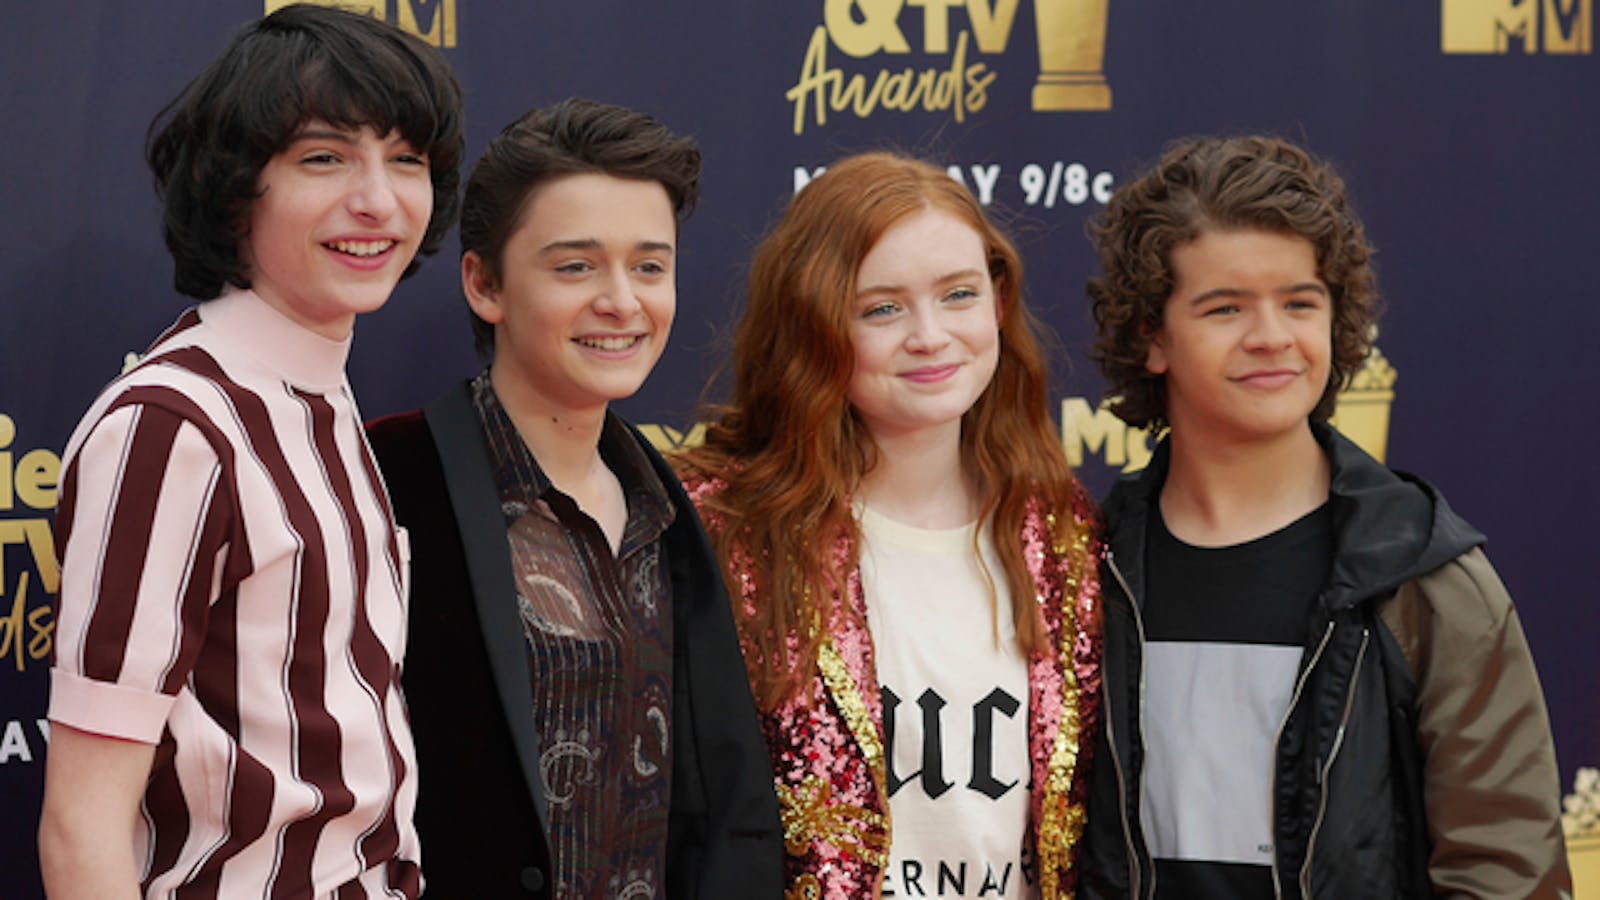 Cast members from Netflix's "Stranger Things" at an awards show last month. Photo: AP